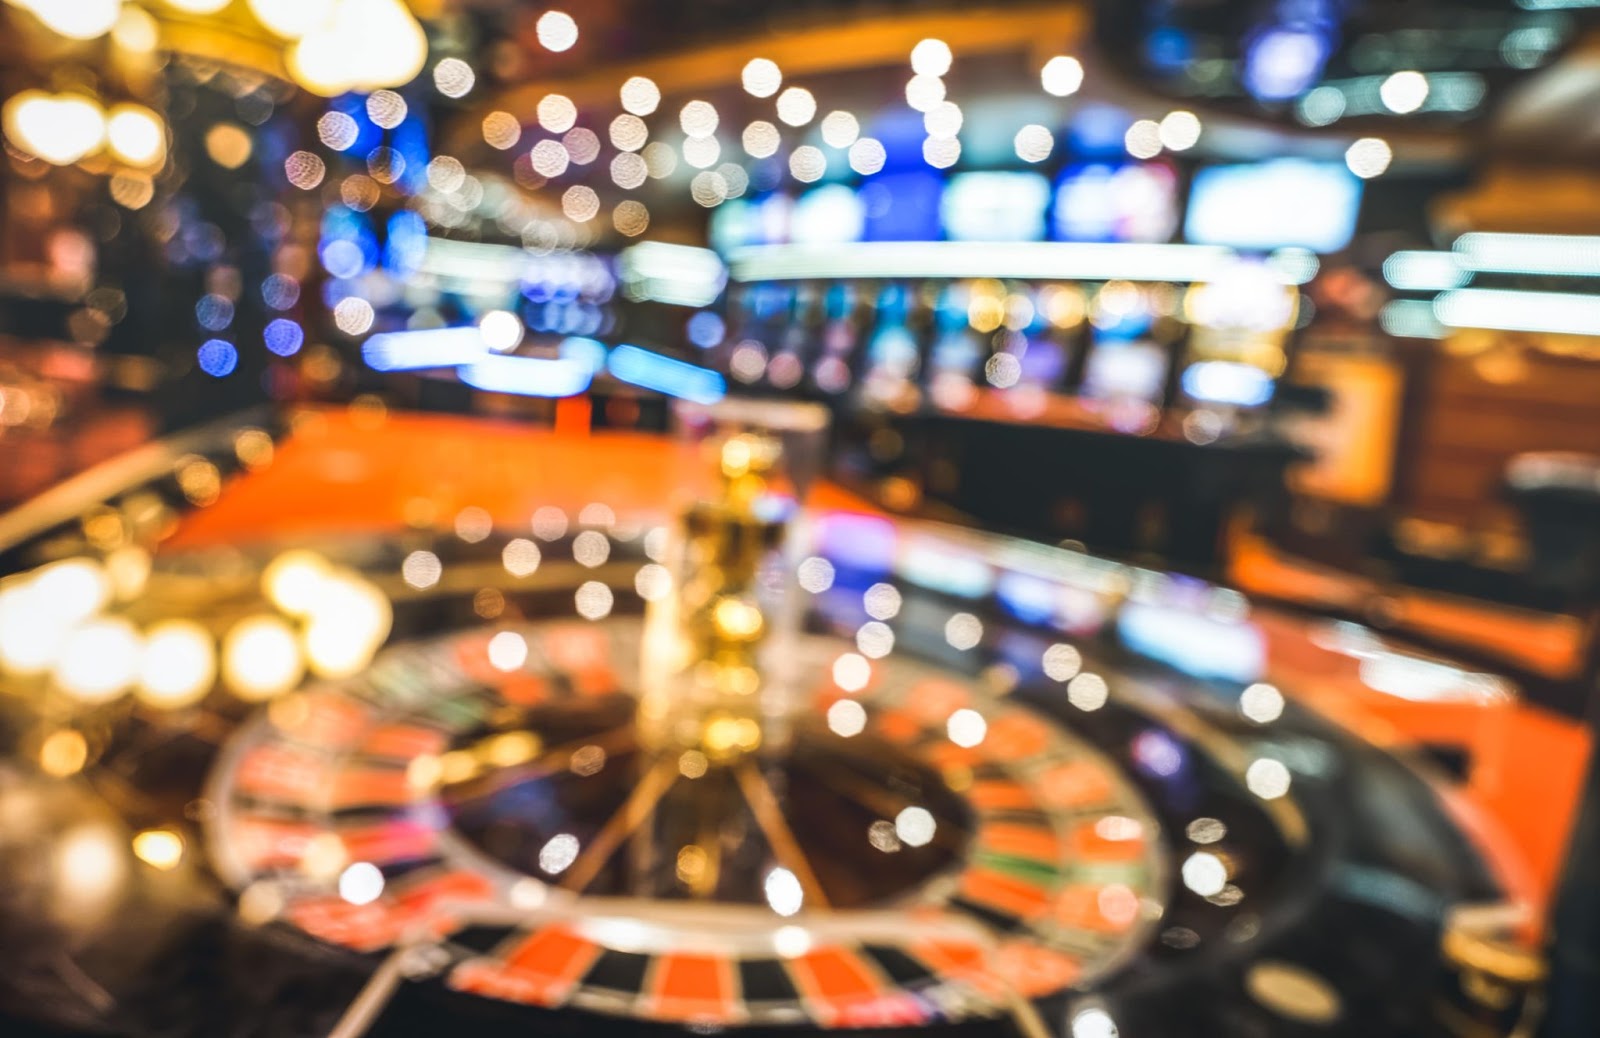 Why Does the House Always Win? A Look at Casino Profitability